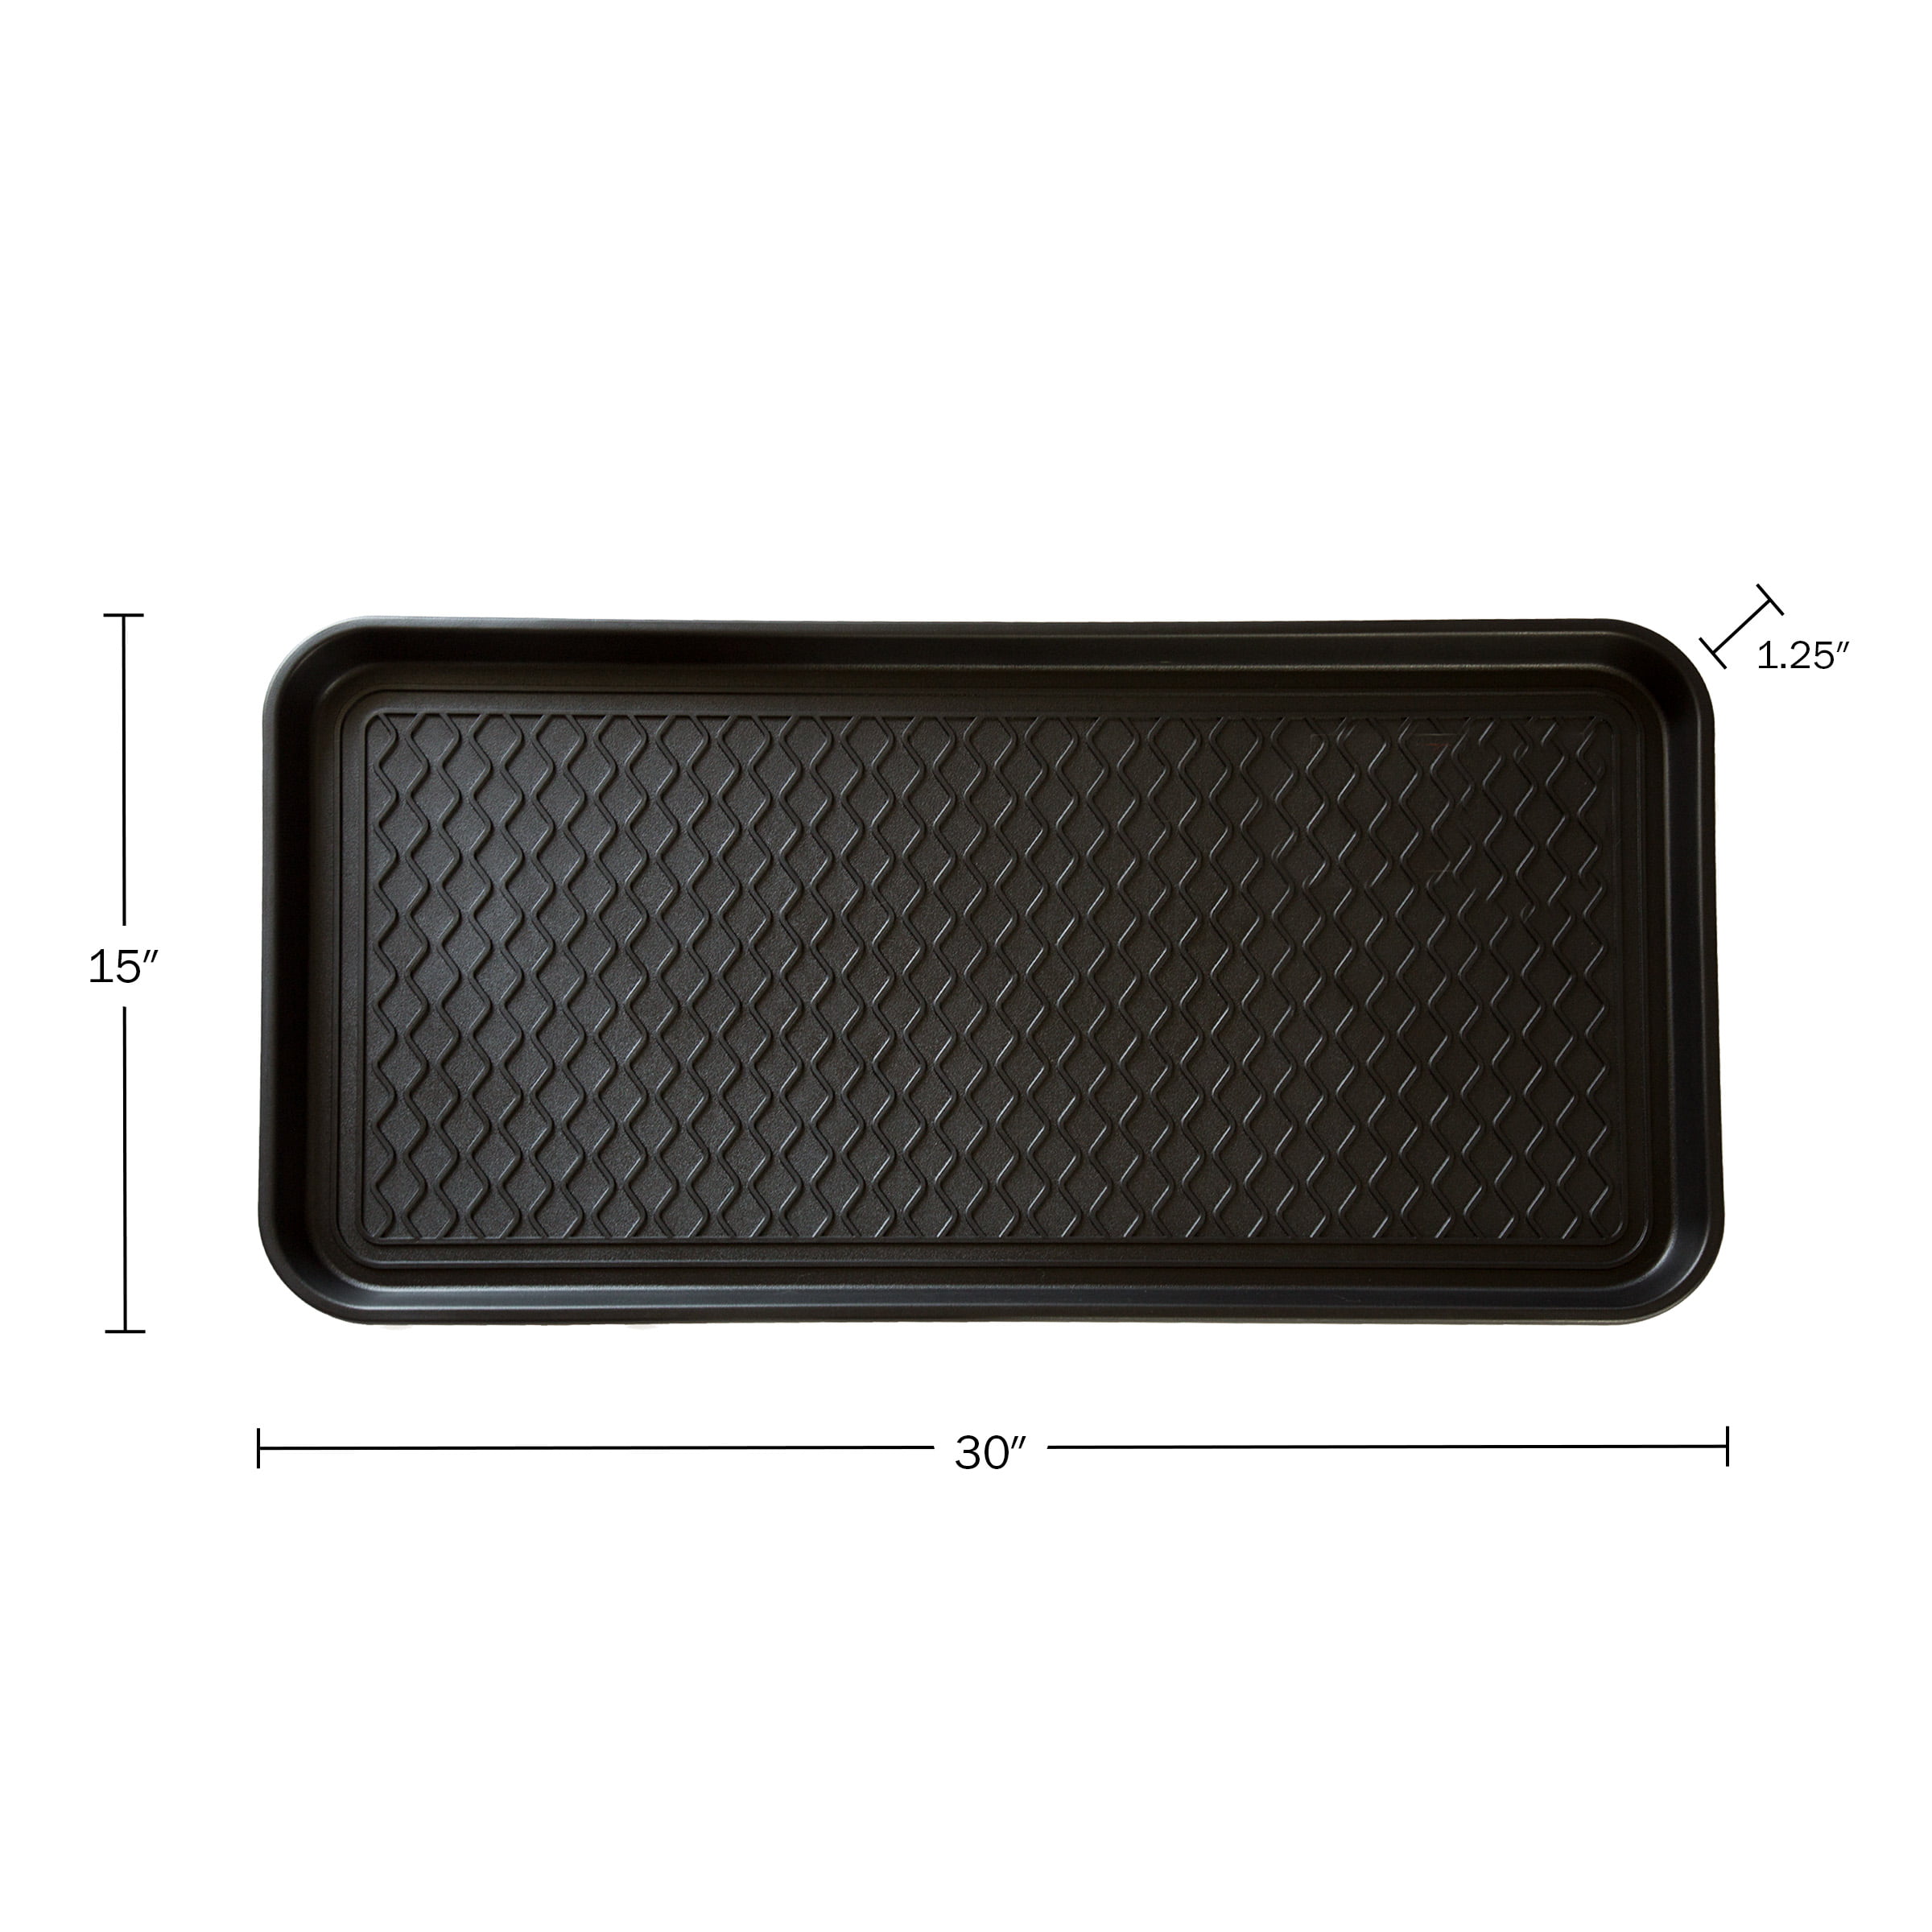 trimate All Weather Boot Tray, Extra Large Size Extra Large, 40”x20”(Black)